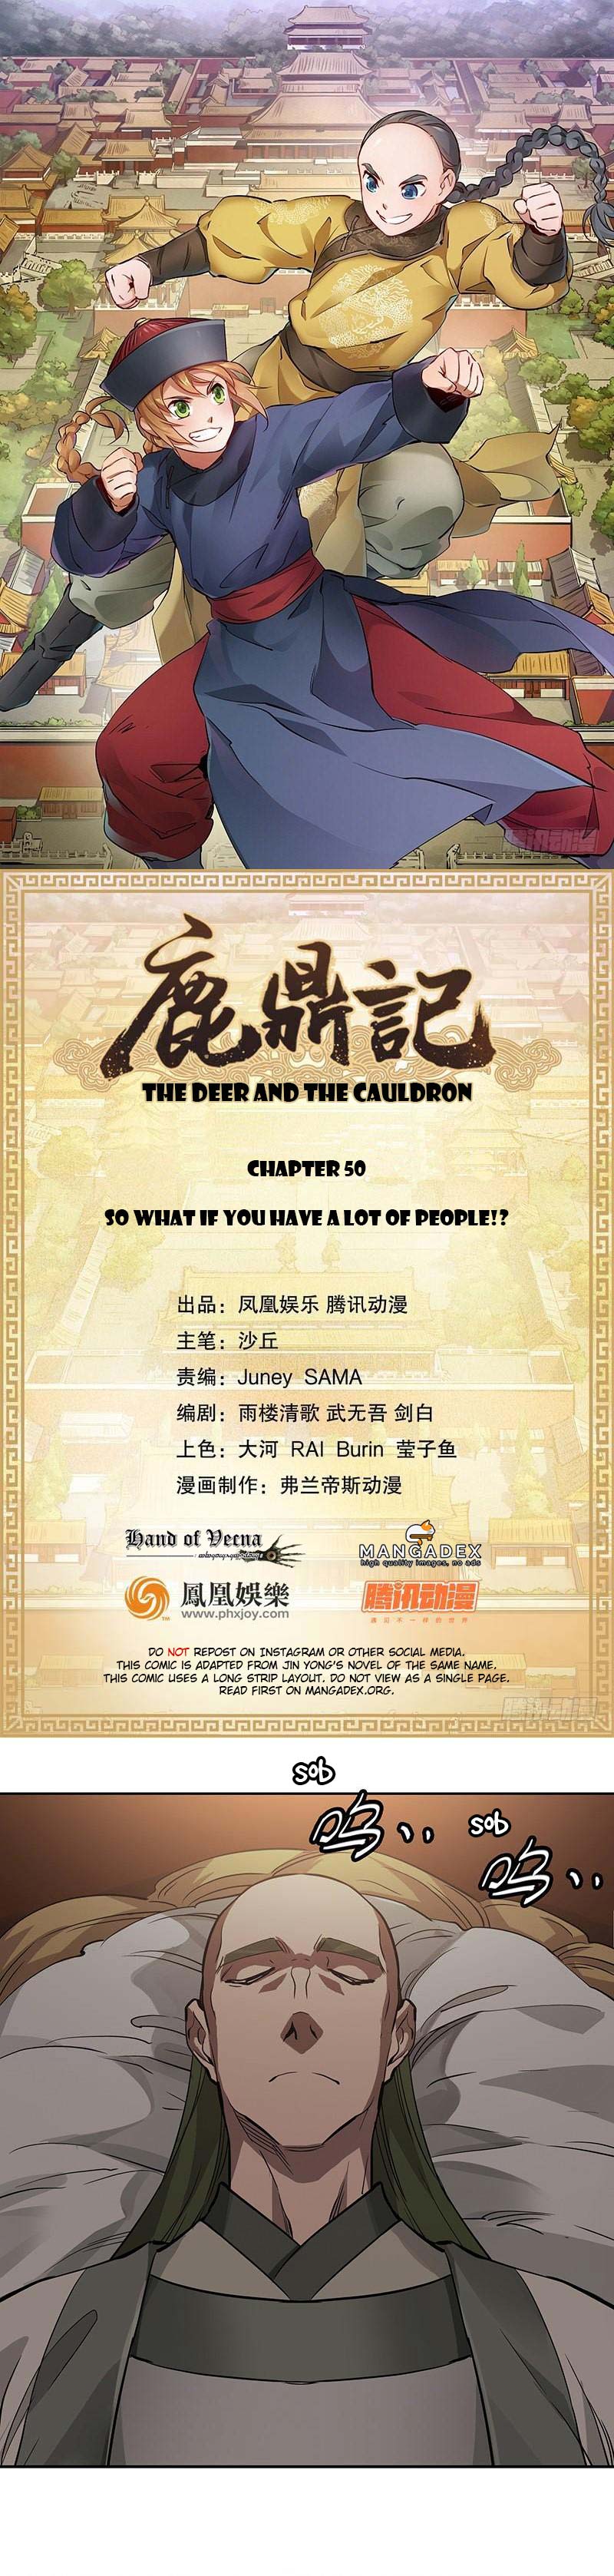 The Deer And The Cauldron Chapter 50 #1